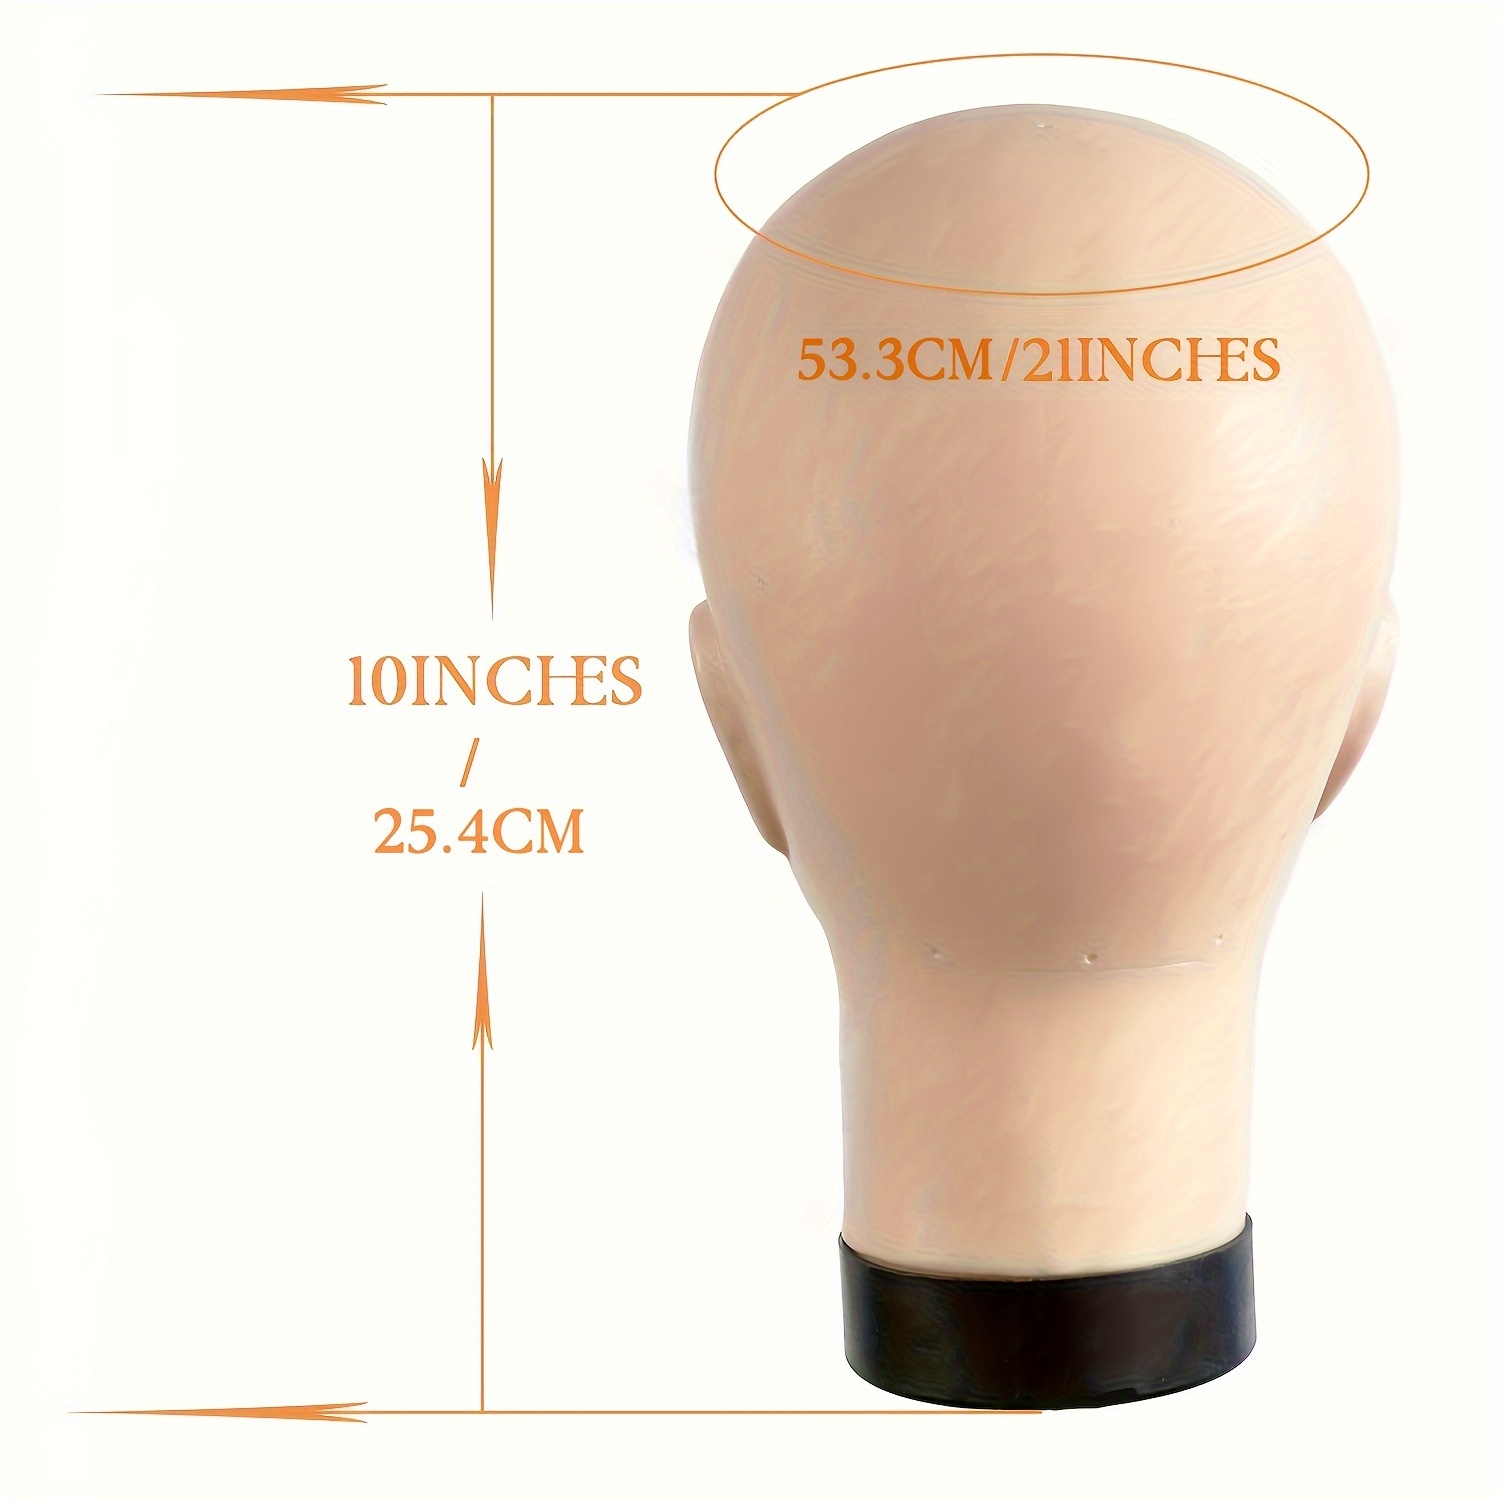 Bald Mannequin Head Brown Female Professional Cosmetology For Wig Making,  Display Wigs, Eyeglasses, Hairs With T Pins 21